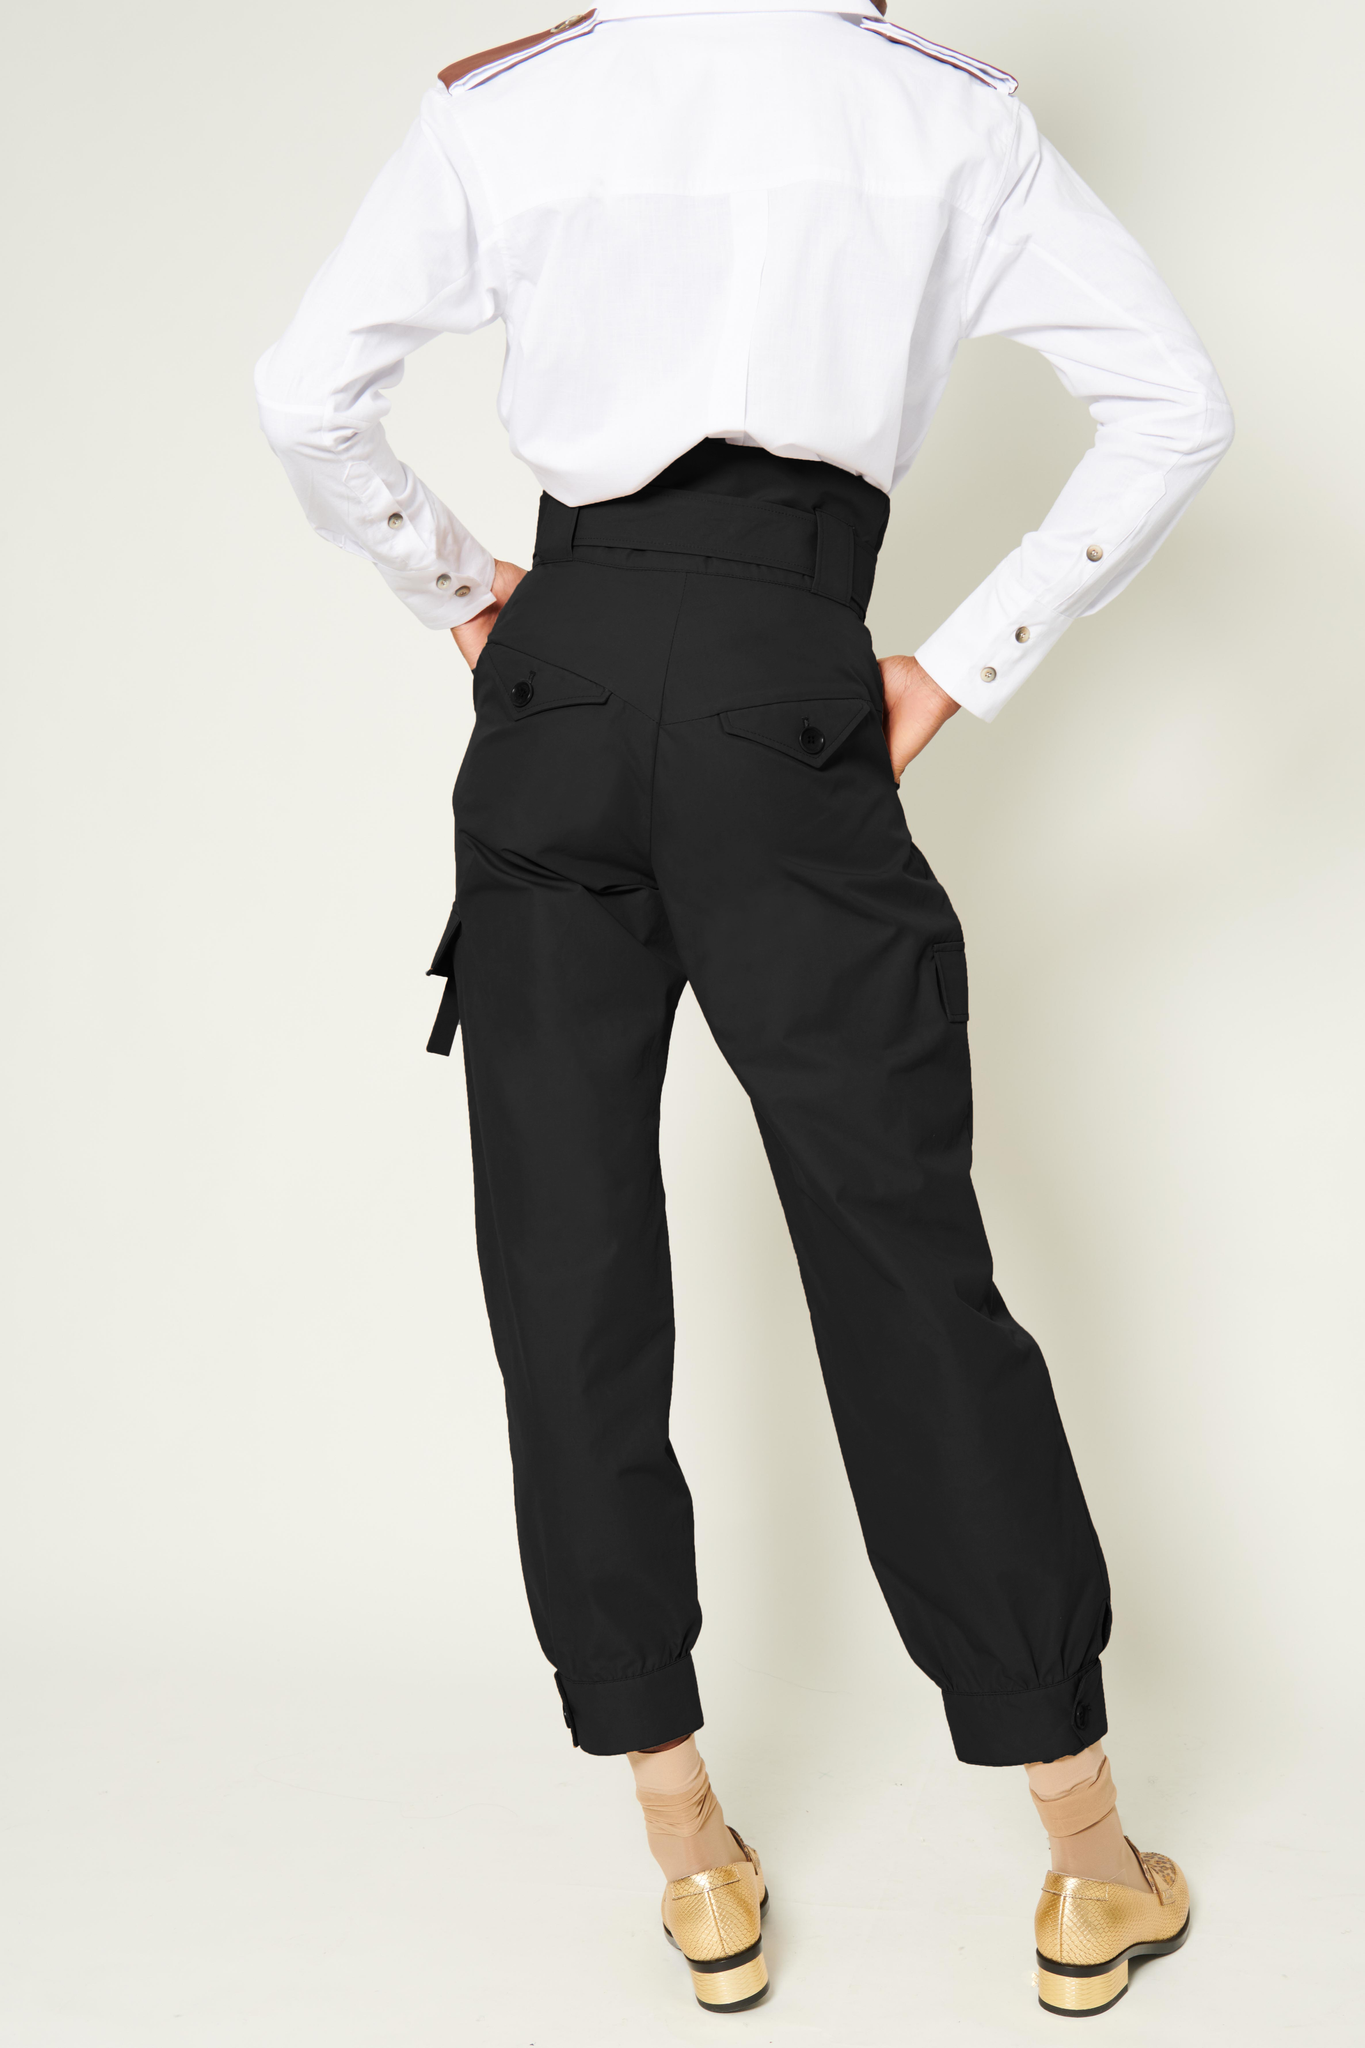 Penelope PLEAT FRONT ANKLE CUFF TROUSERS - BLACK